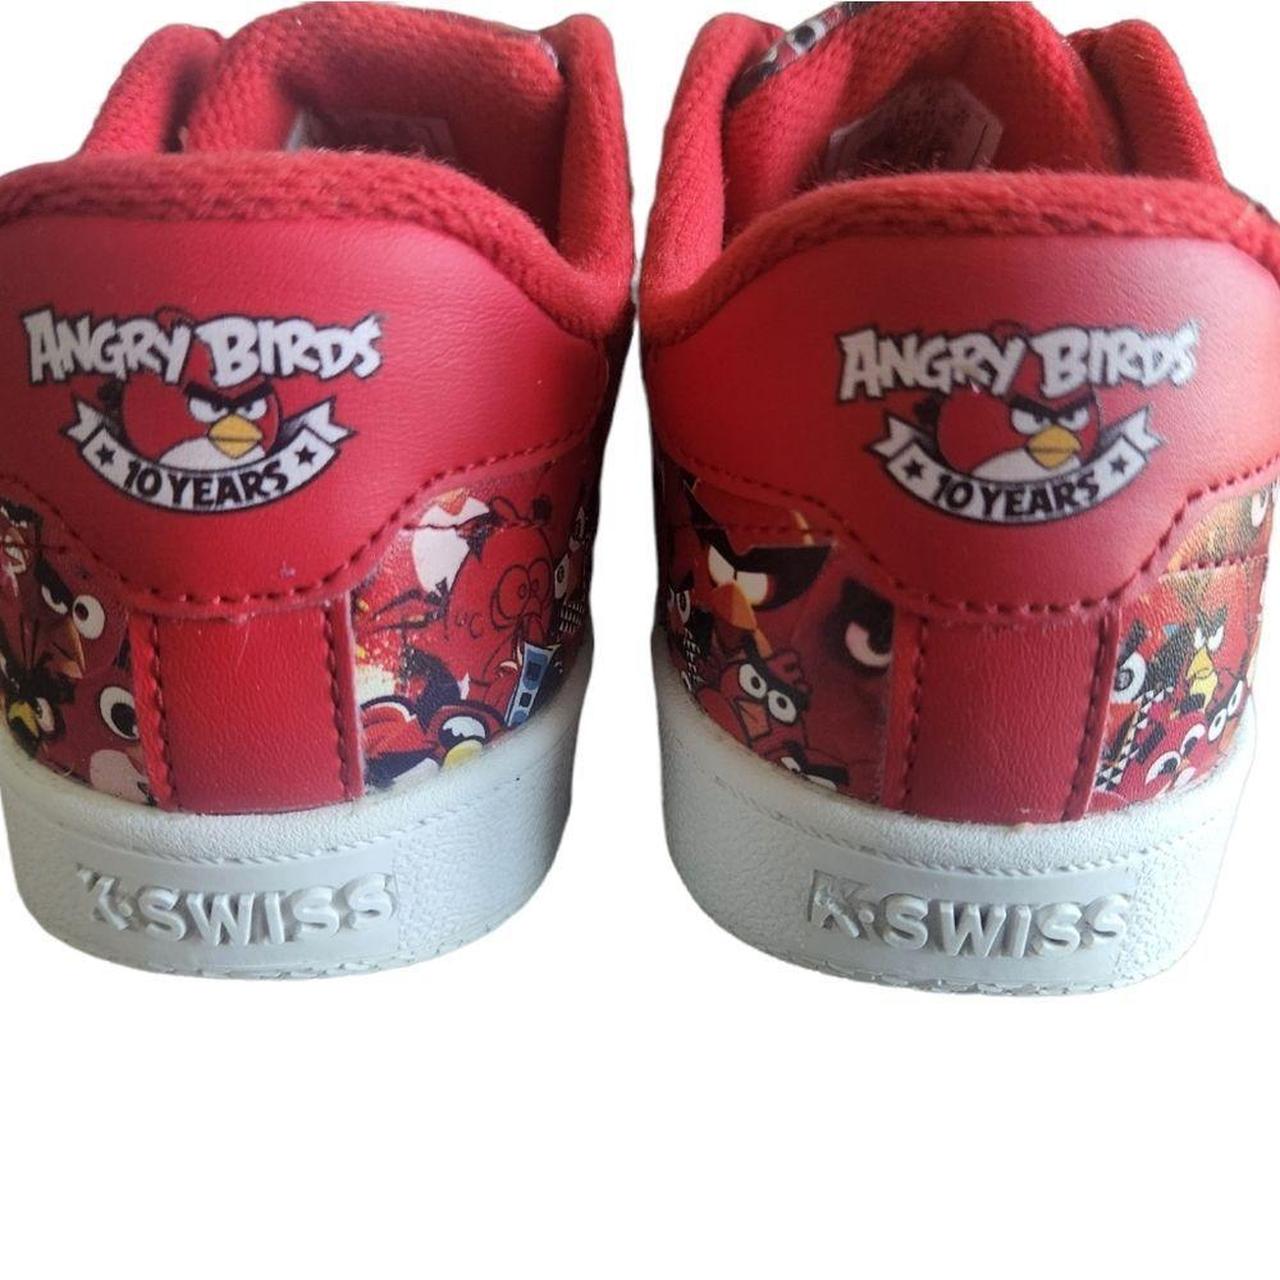 Product Image 4 - K- Swiss Angry Birds Red